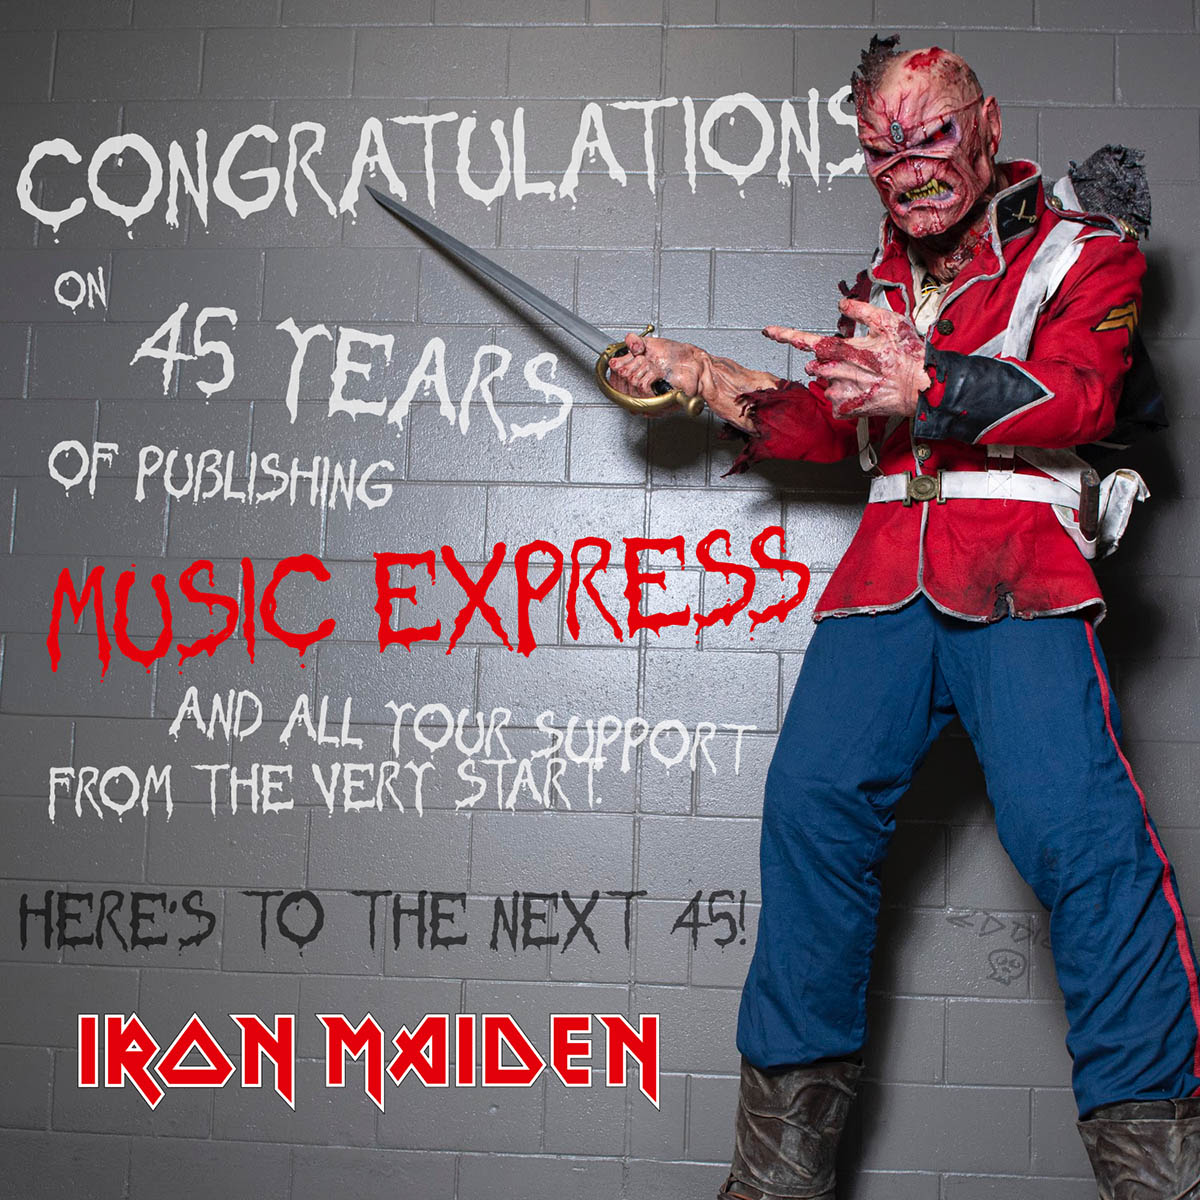 Congratulations on 45 Years of Publishing Music Express and all your support from the very start. Here's to the next 45! Iron Maiden